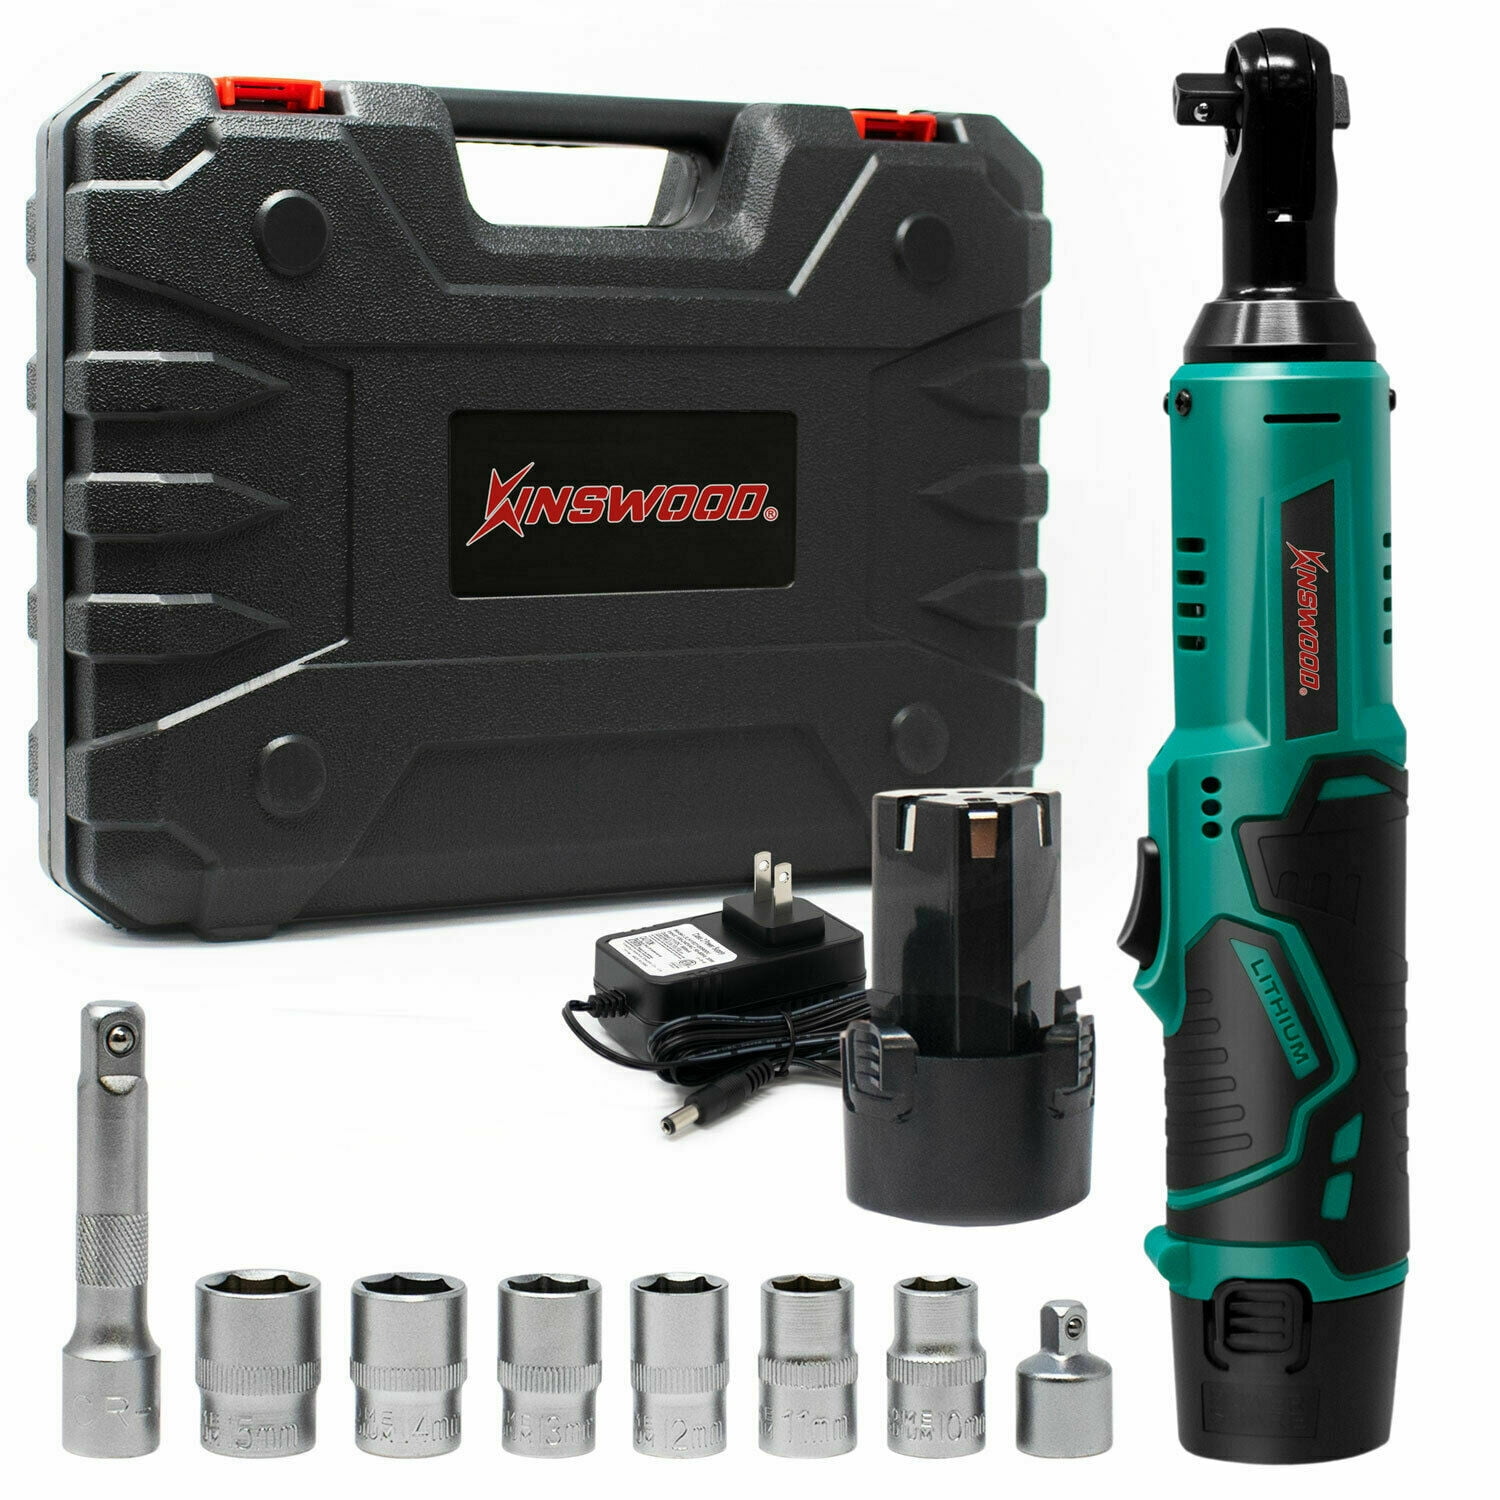 20V Max 2200RPM 480Nm 1/2" Cordless Impact Wrench Battery Included Kinswood 